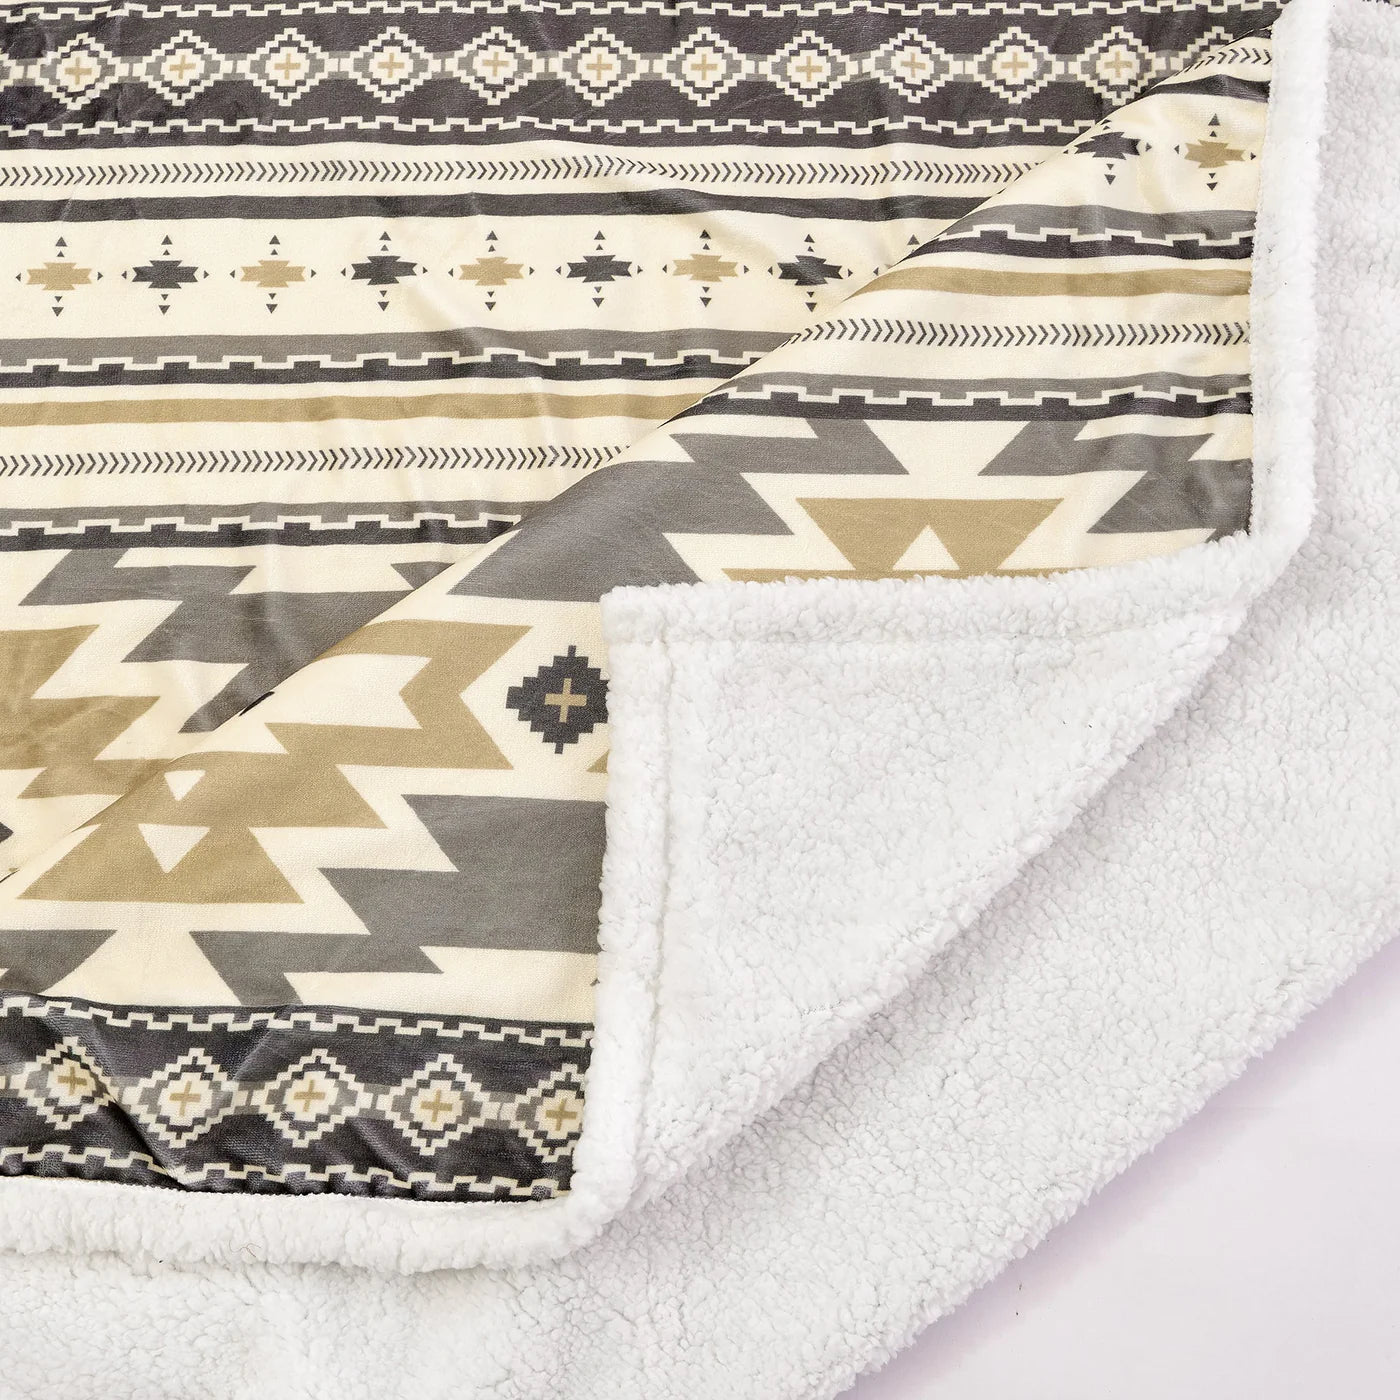 The Sage Campfire Throw is an affordable answer to stylish Southwestern design. Featuring muted Aztec prints and a Sherpa reverse, this lightweight throw provides luxurious comfort and warmth. Perfect for cozy nights at home or around a campfire, this throw offers practicality and stylish sophistication.